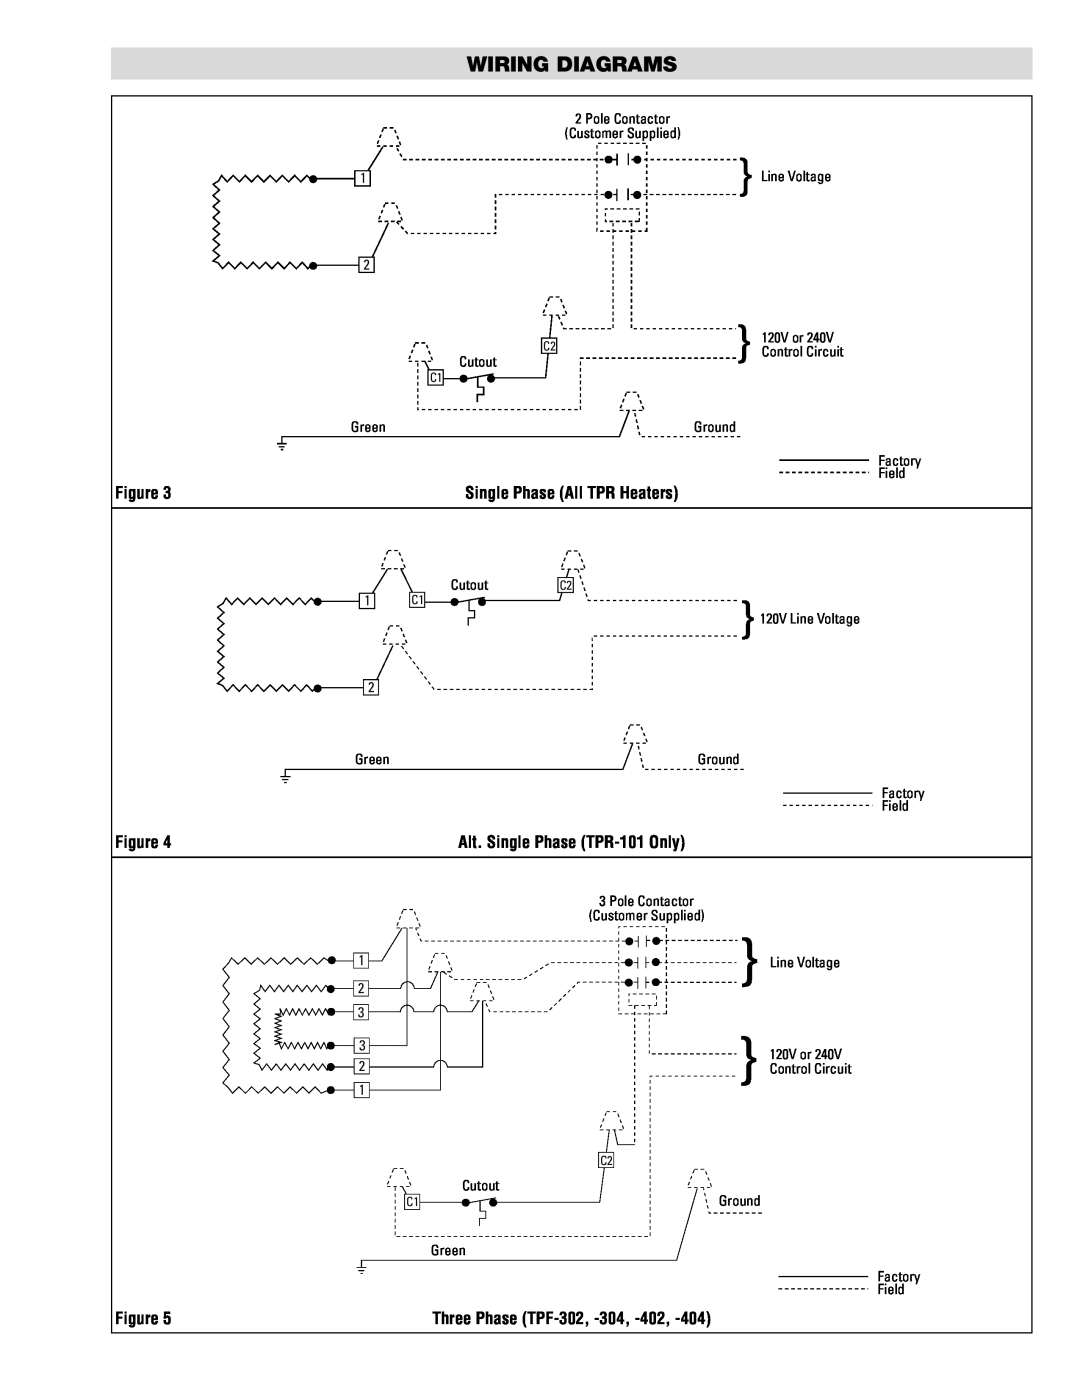 Chromalox PD437-4 specifications Wiring Diagrams, Three Phase TPF-302 